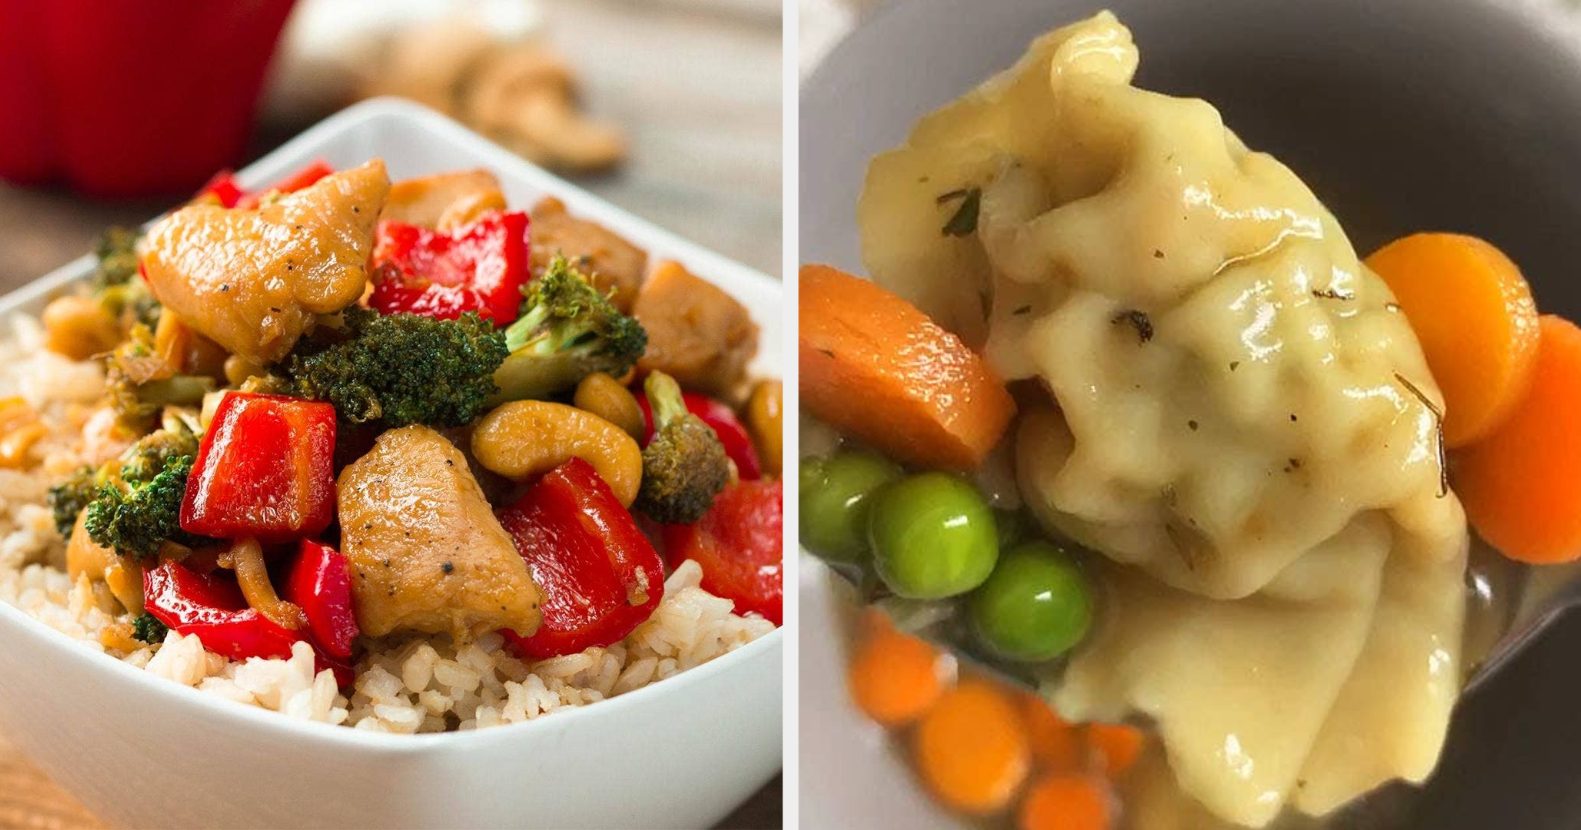 15 Hot Lunch Ideas That Are Healthy & Easy - Homemade Mastery